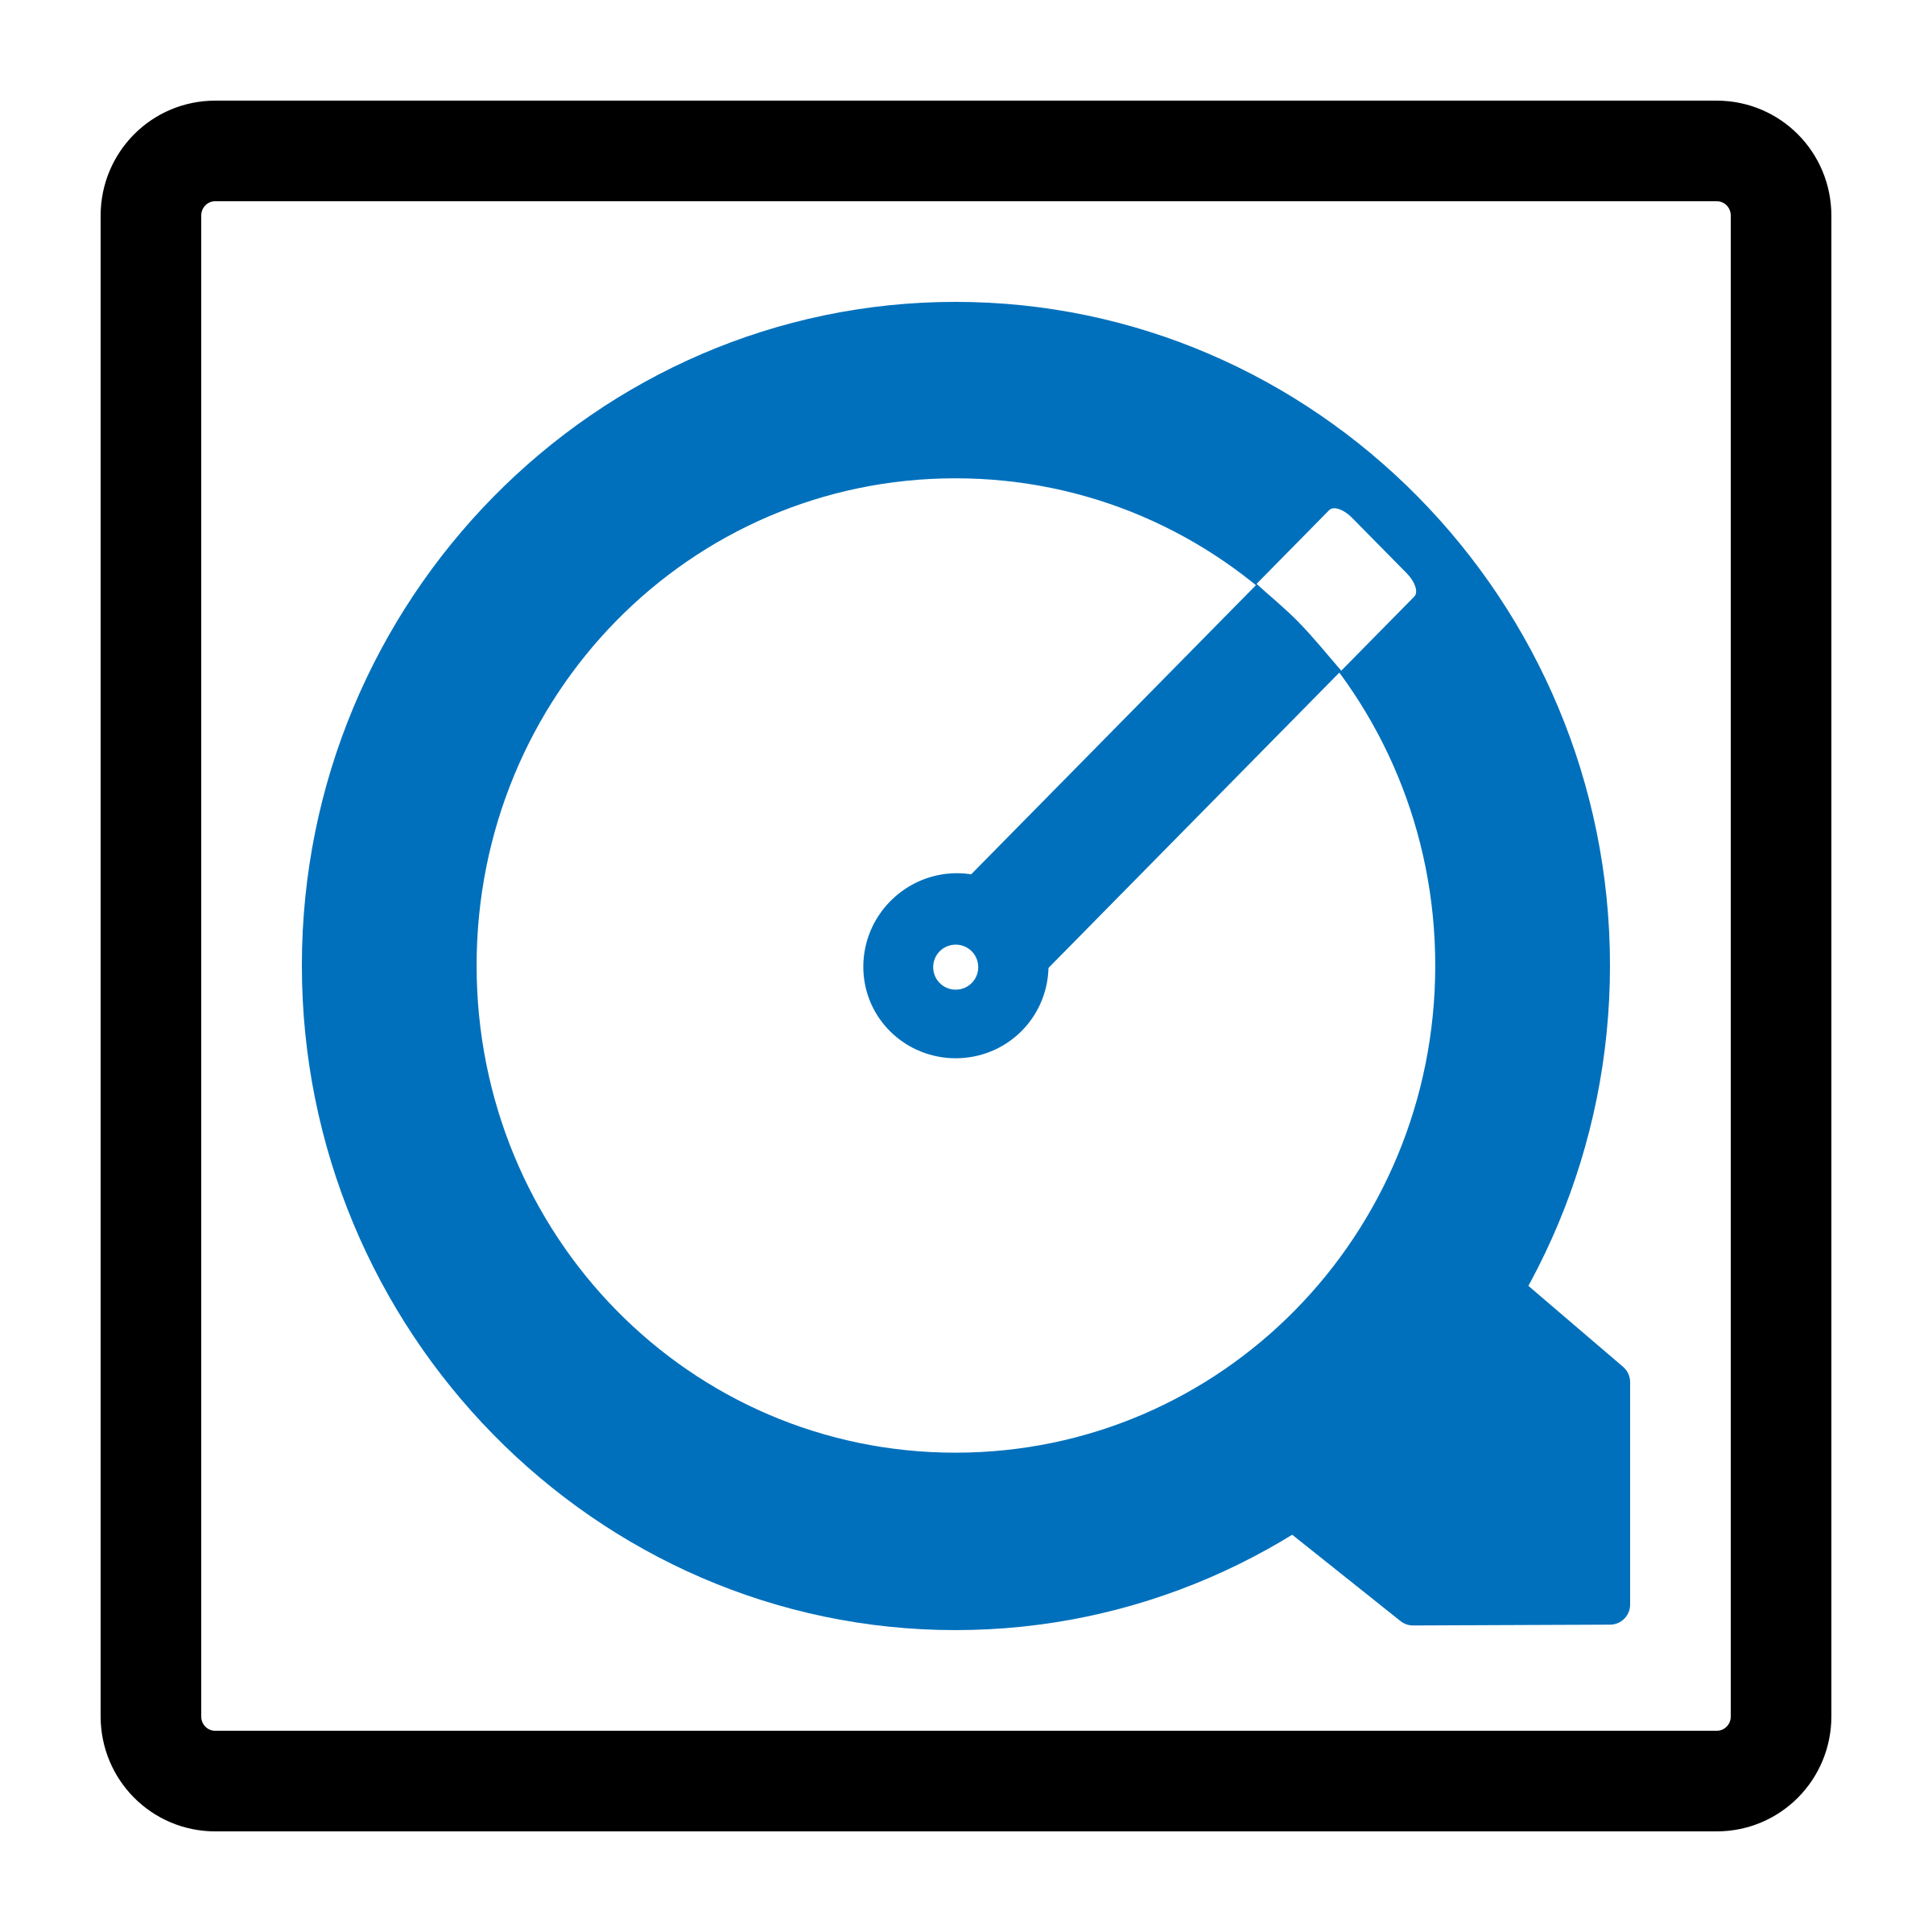 quicktime free download